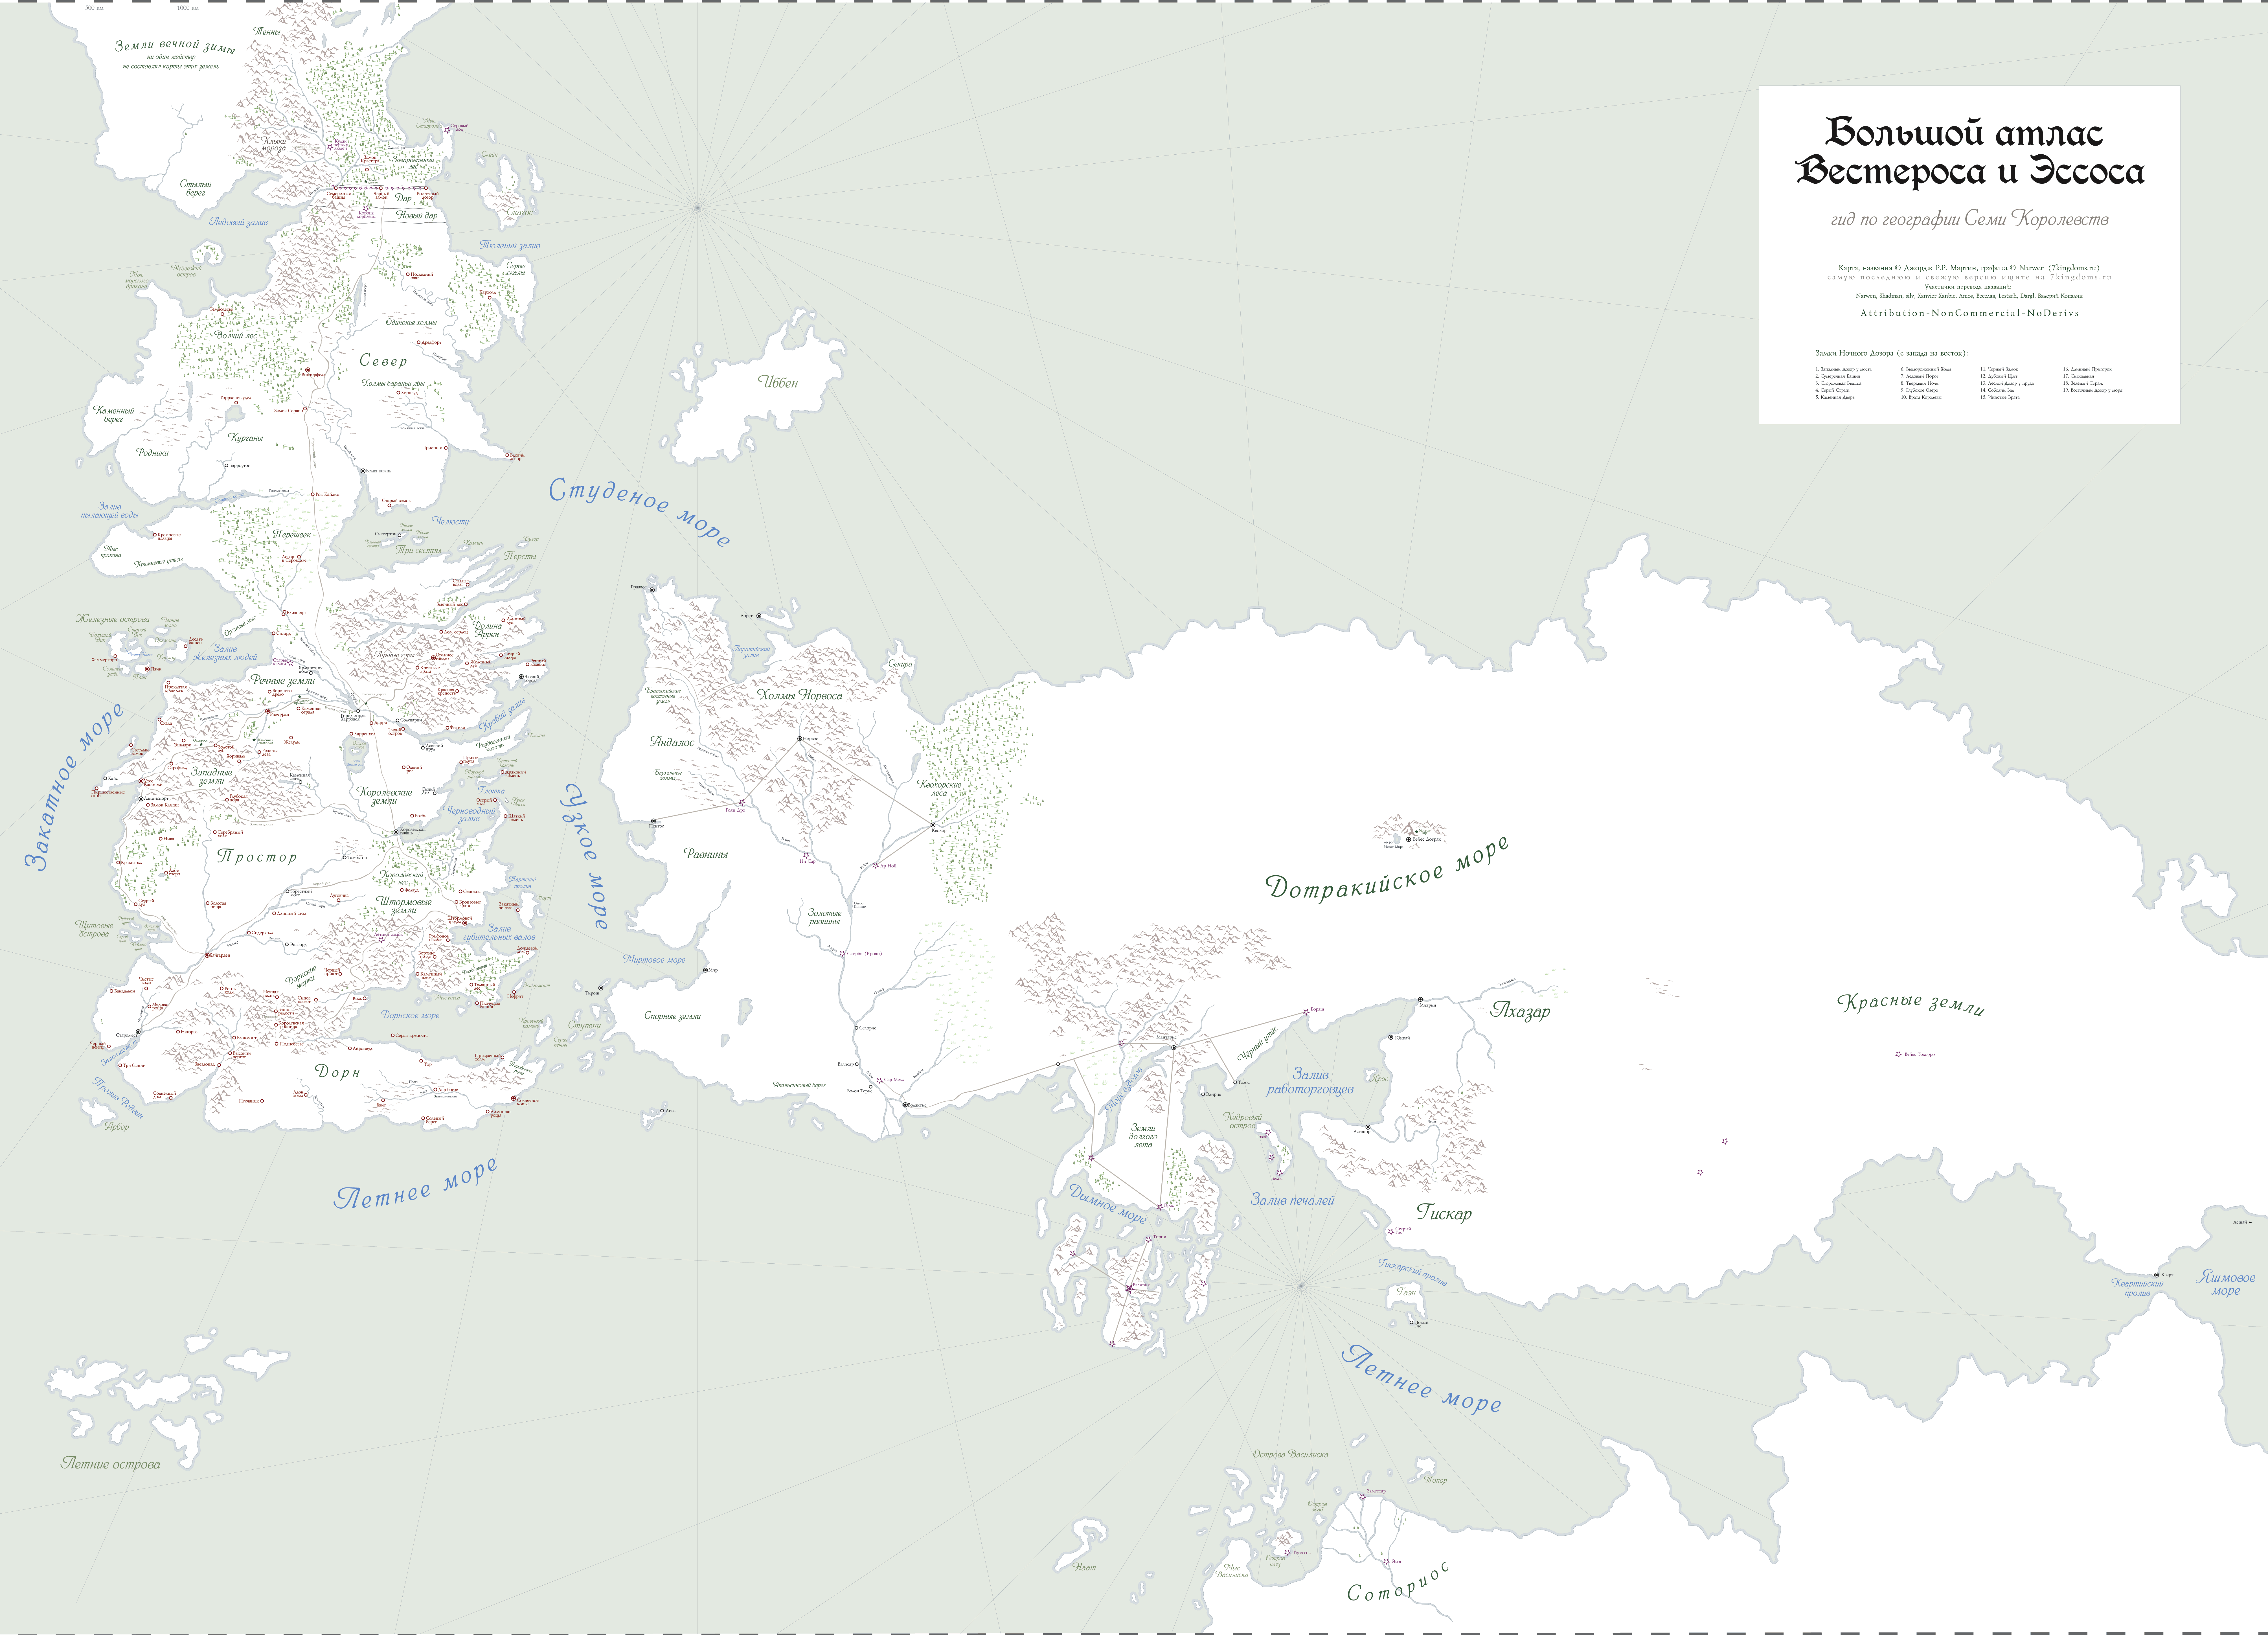 http://7kingdoms.ru/wp-content/uploads/2011/07/westeros-map.gif